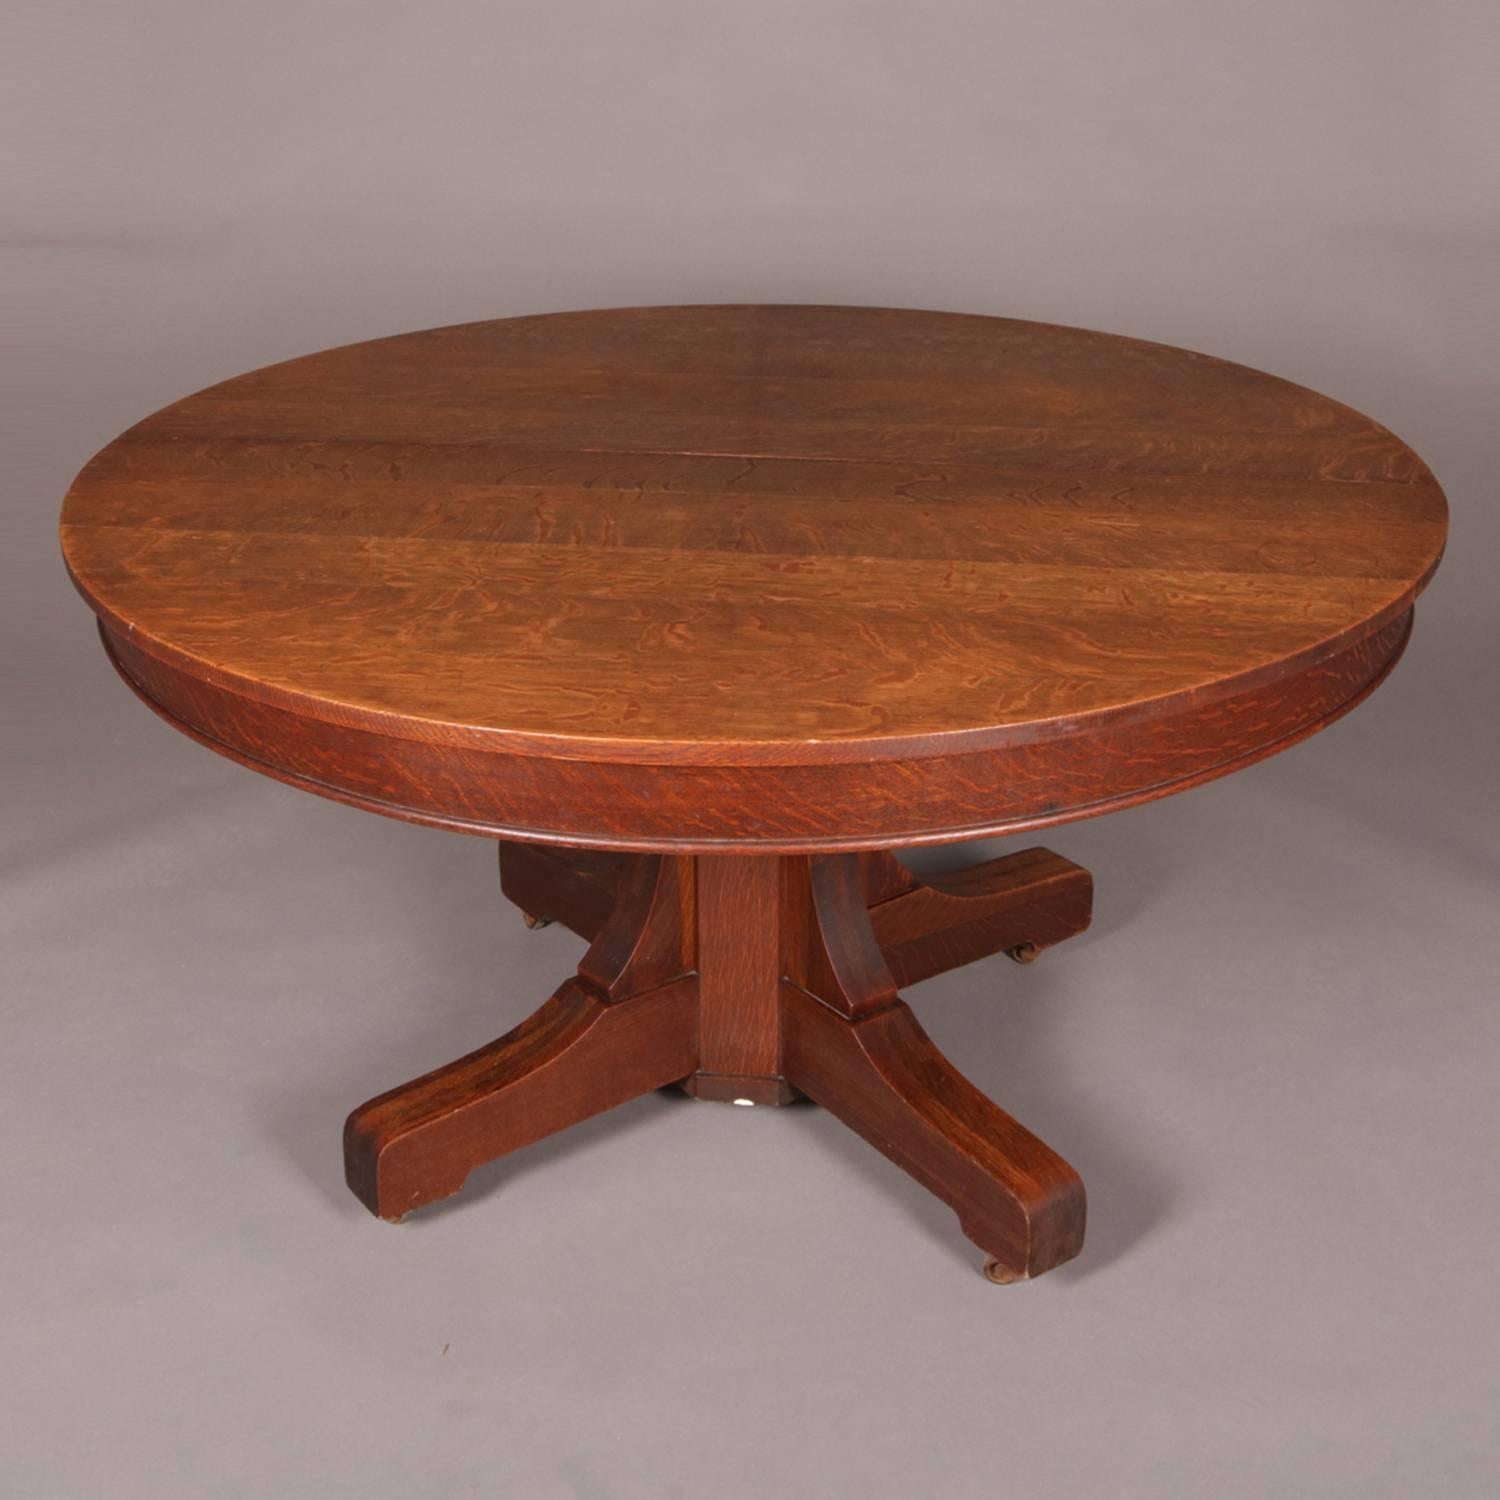 Antique Arts & Crafts mission oak dining table by Hastings features pedestal base with four legs, expands to accommodate three 9